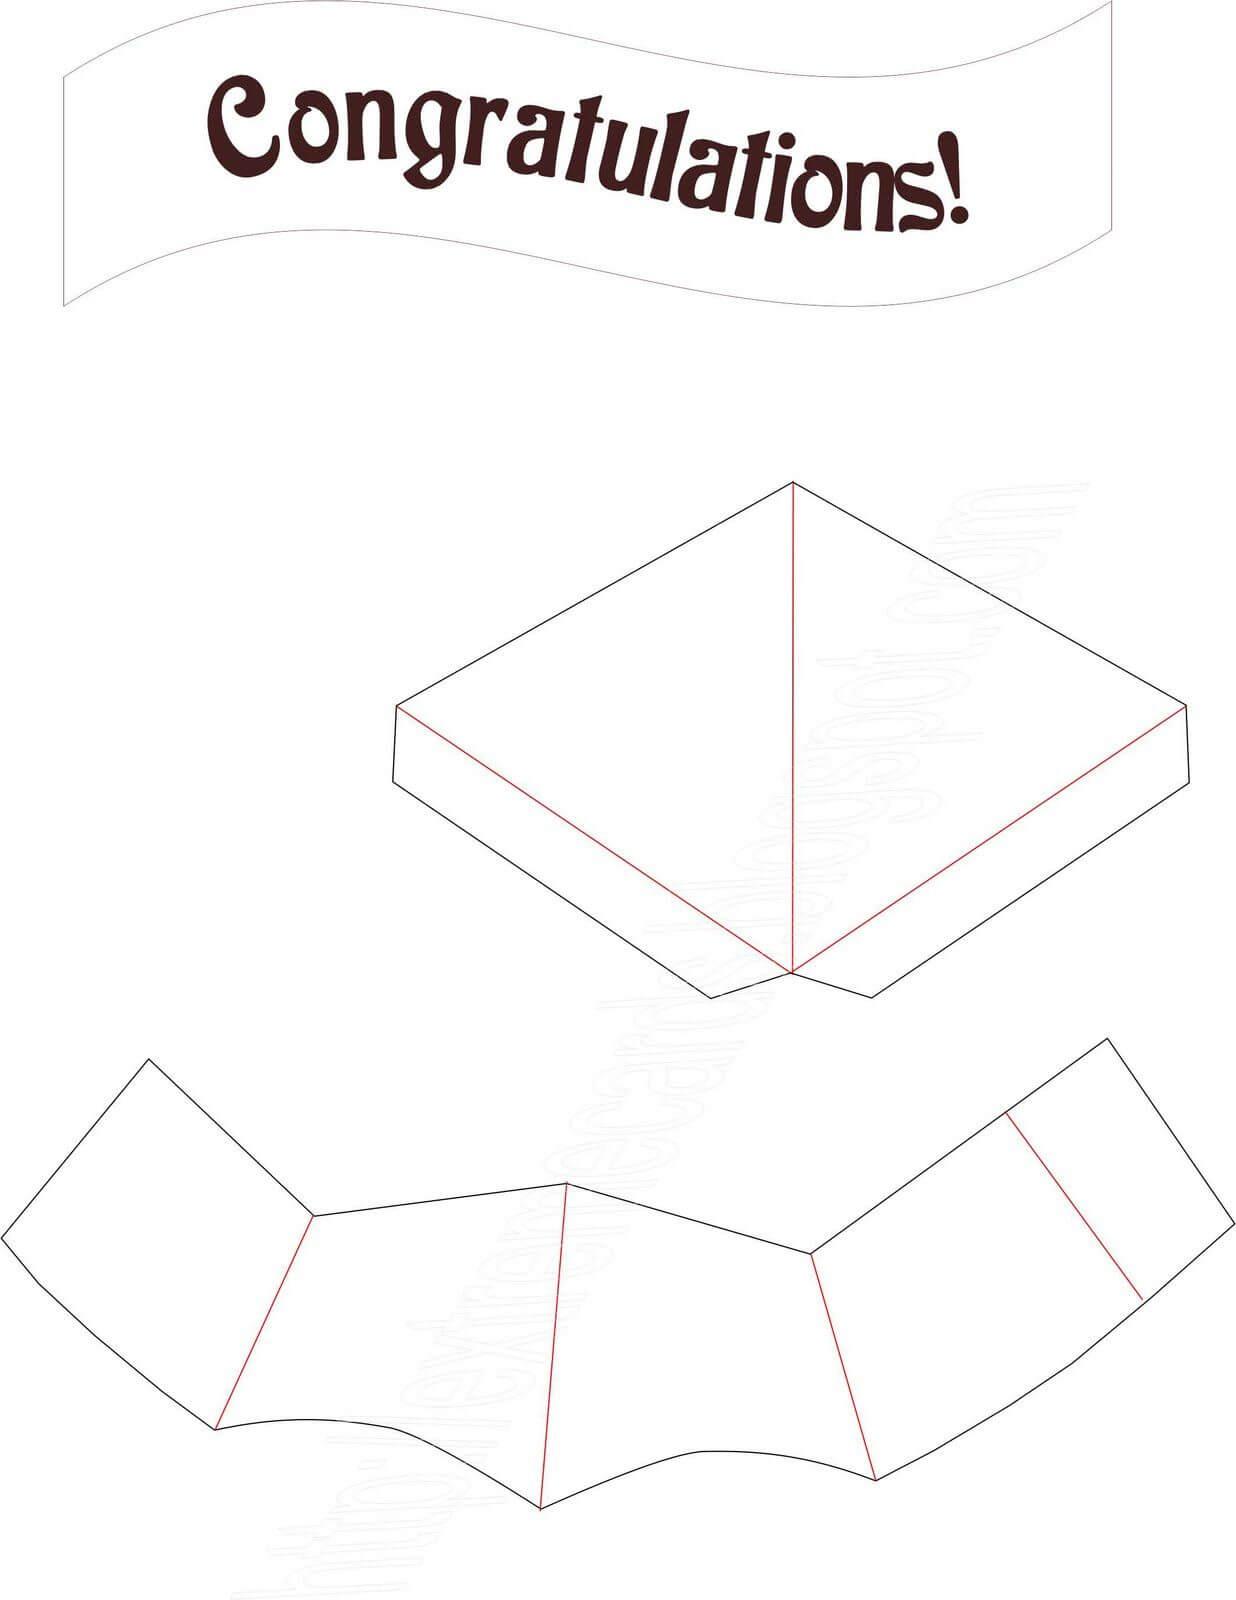 Extreme Cards And Papercrafting: Graduation Cap Pop Up Card Within Graduation Pop Up Card Template